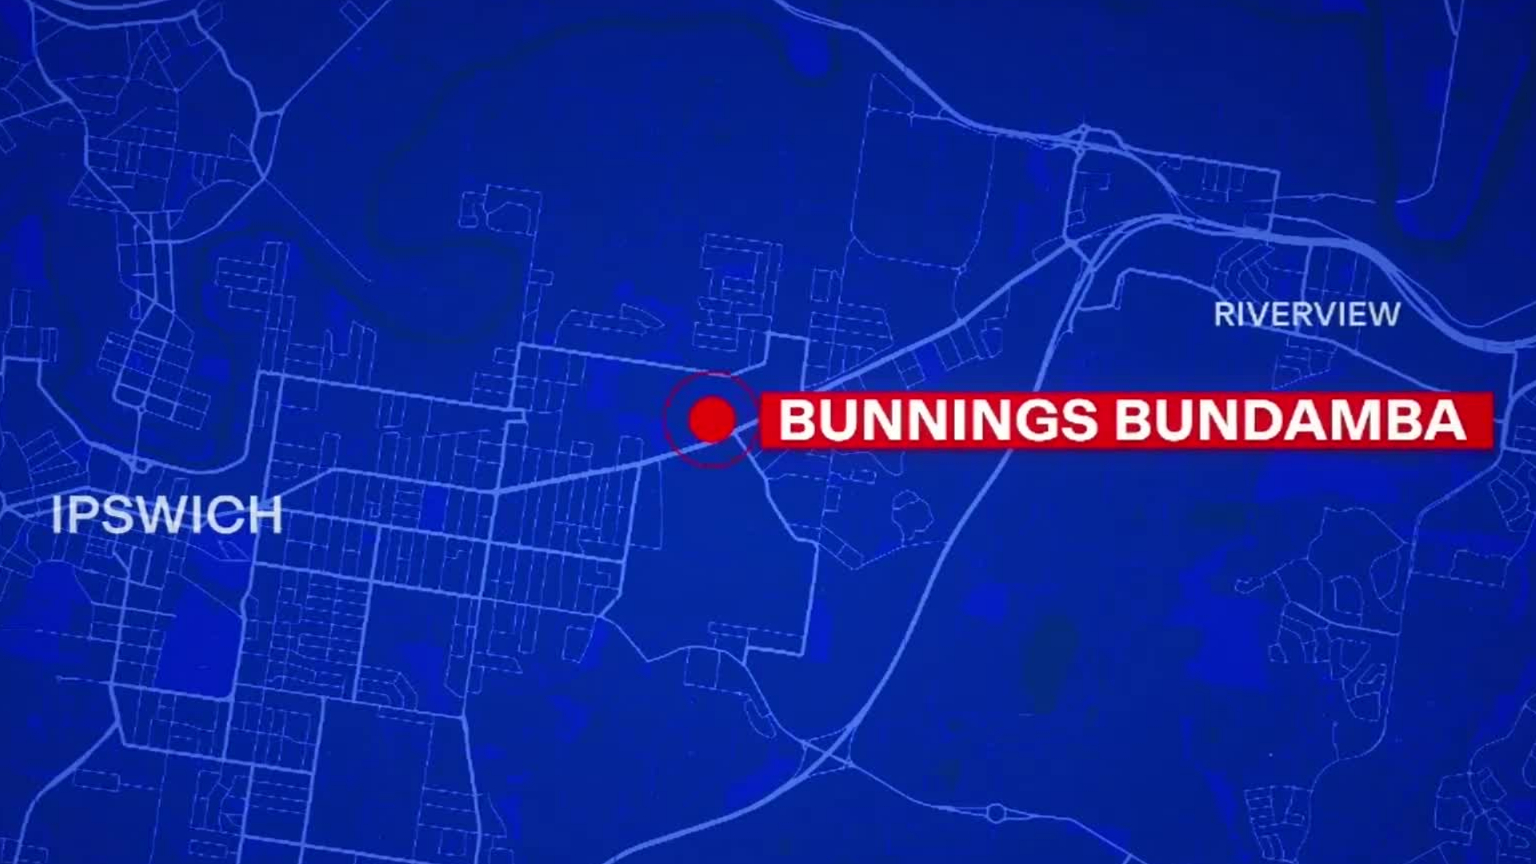 Man taken to hospital after alleged stabbing in Bunnings carpark